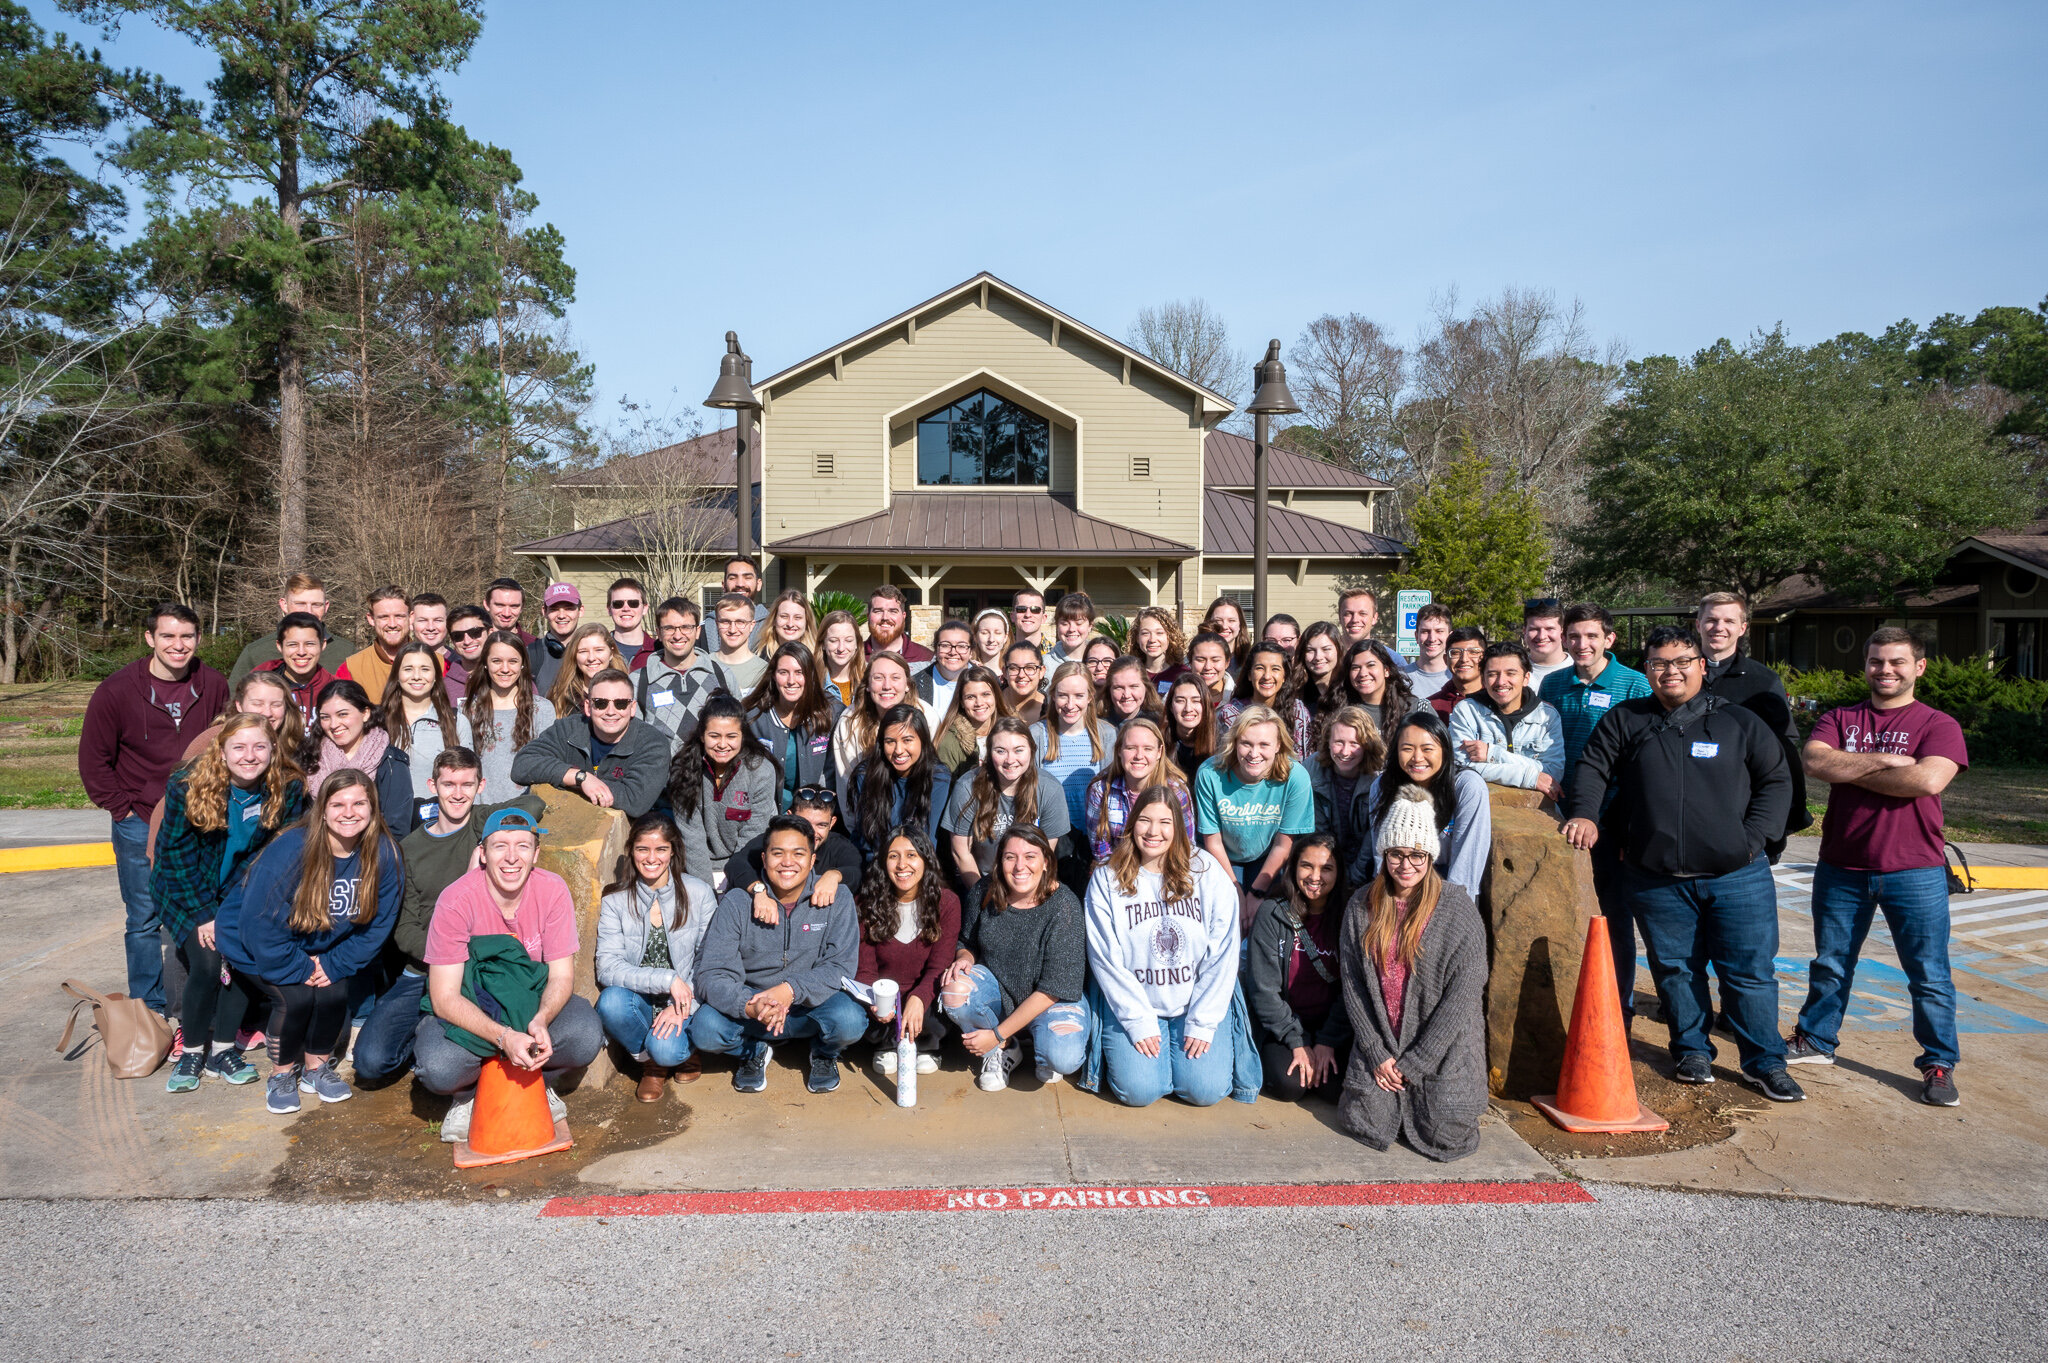 Senior Outbound - January 28-30, 2022Senior Outbound is a retreat offered each Spring for graduating seniors. It is a relaxed weekend of prayer and reflection meant to provide you with tools for moving on to post-college life.  